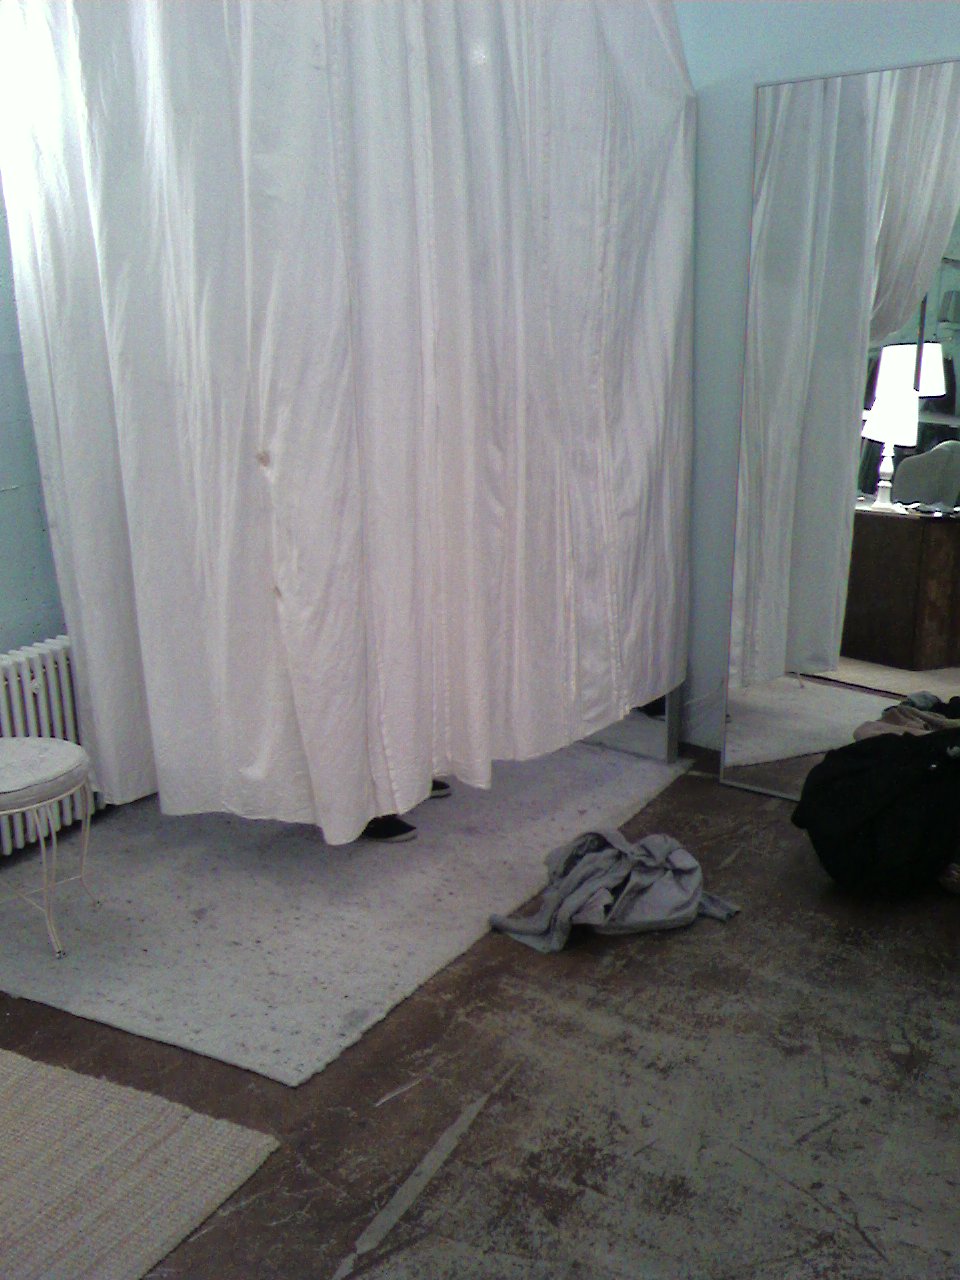 a white curtain is hanging next to a black suitcase